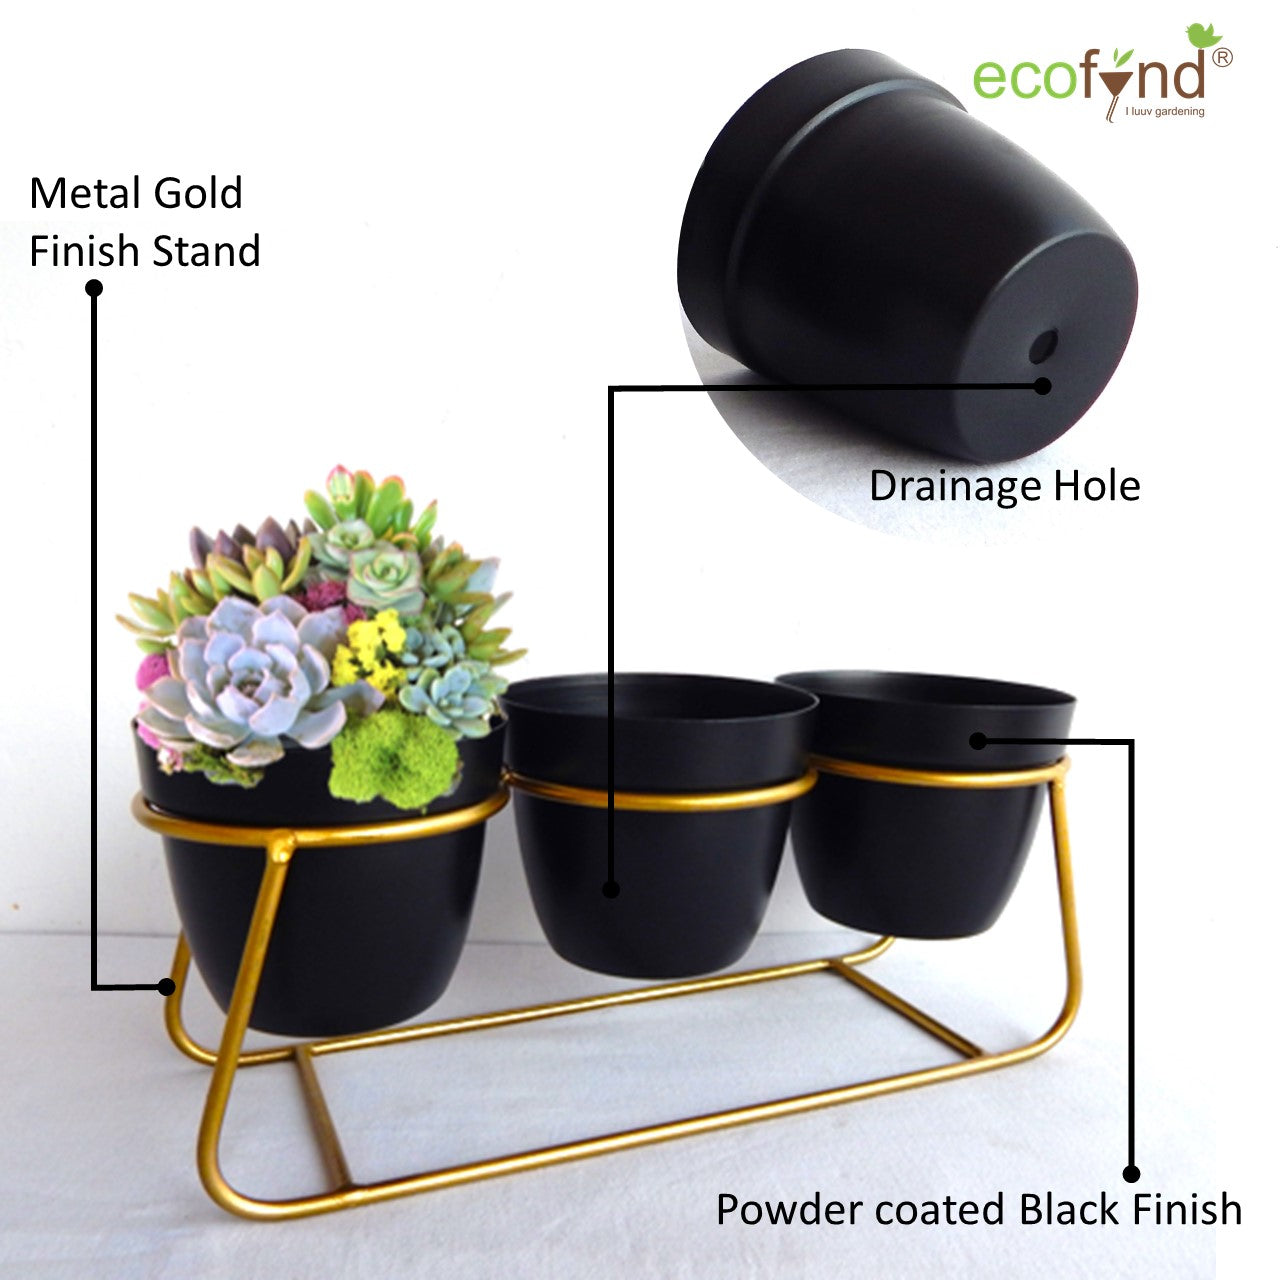 ecofynd 4 inches Bella Black Metal Planter Pot with Gold Stand Planter freeshipping - Ecofynd